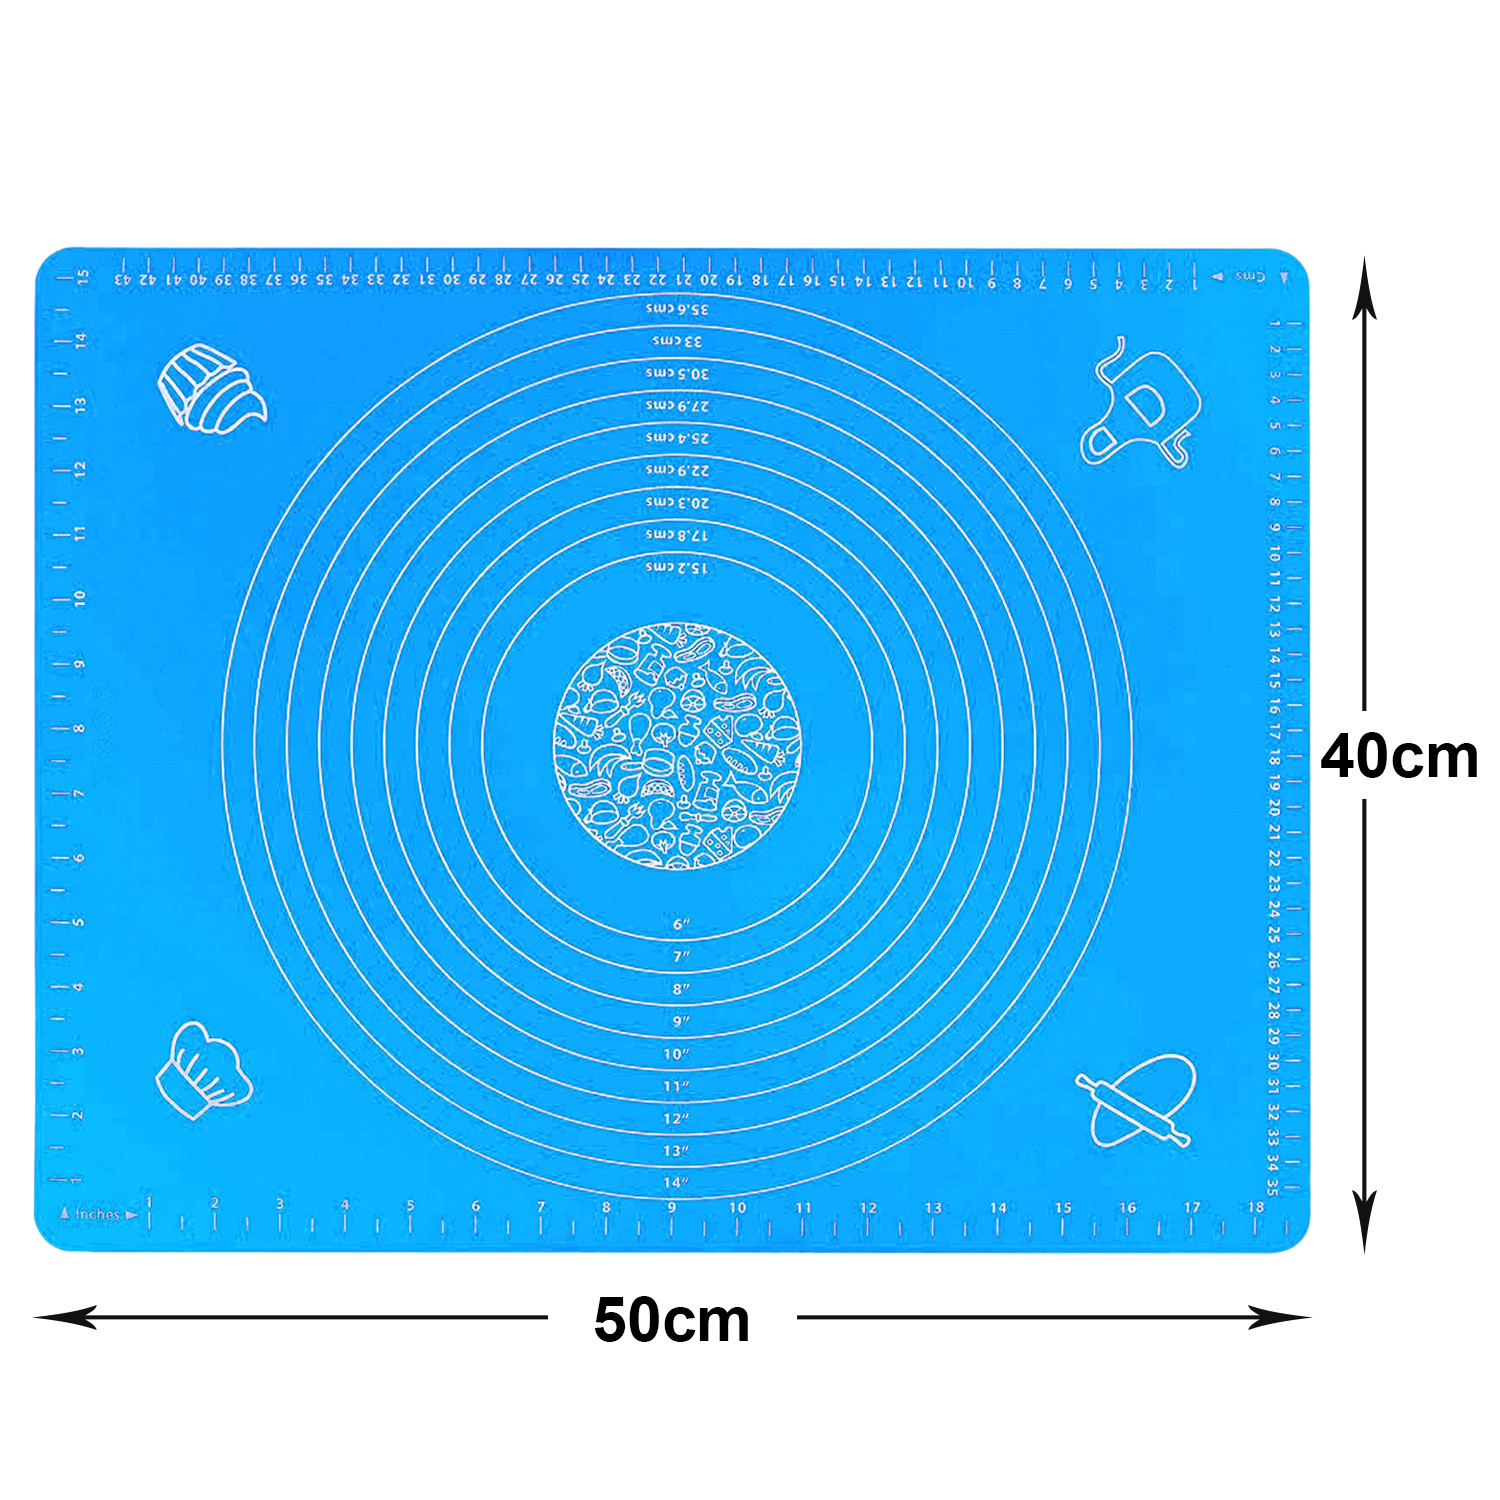 Kuber Industries Baking Mat|Silicone Non-Stick Stretchable Kneading Mat|Fondant Rolling Mat For Kitchen,Roti,Chapati,Cake,19 x 16 Inche (Sky Blue)